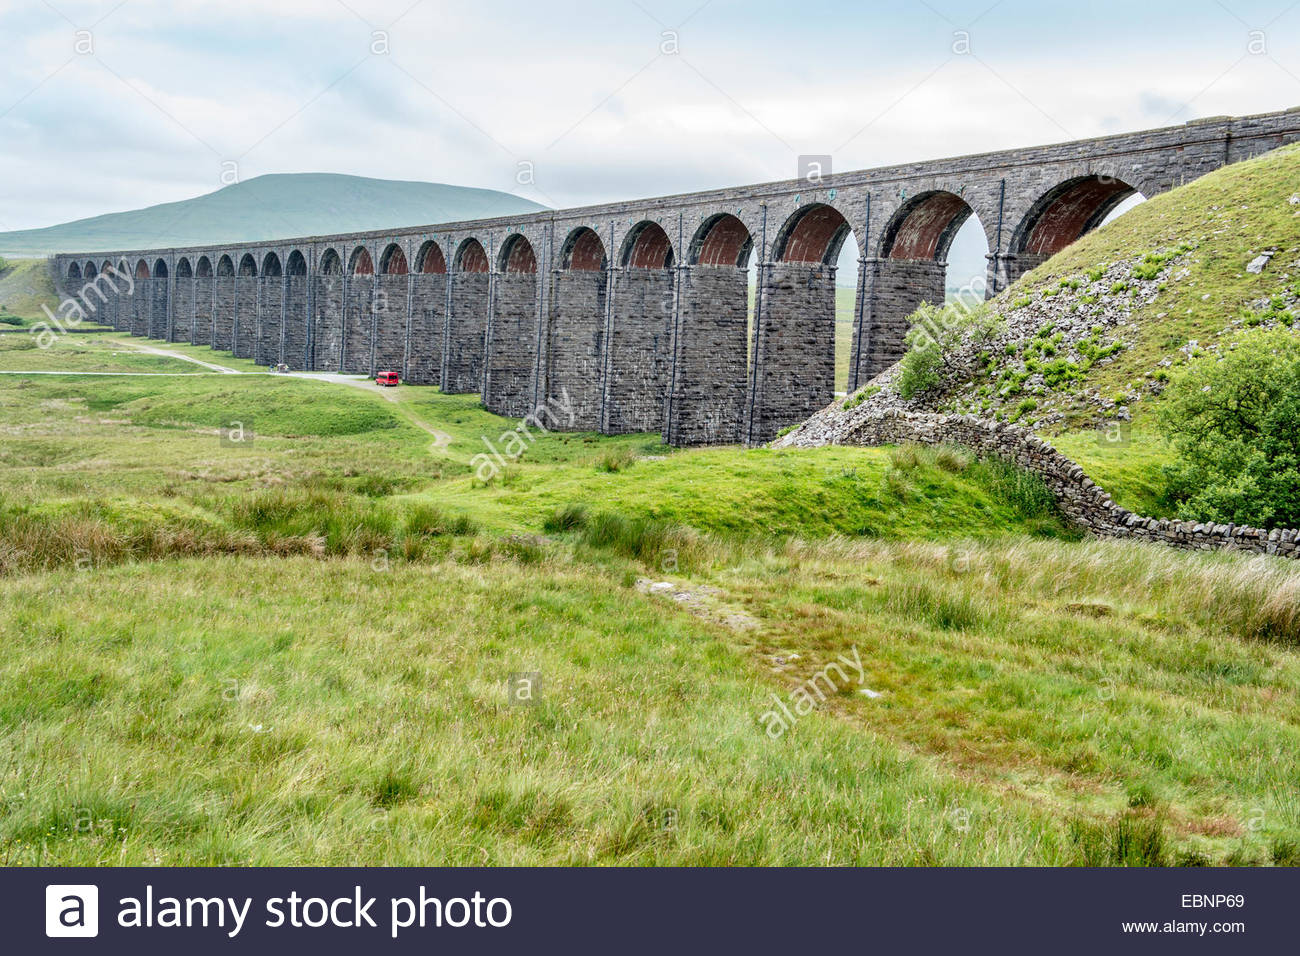 ribblehead-viaduct-showing-a-number-of-arches-forming-a-railway-bridge-EBNP69.jpg